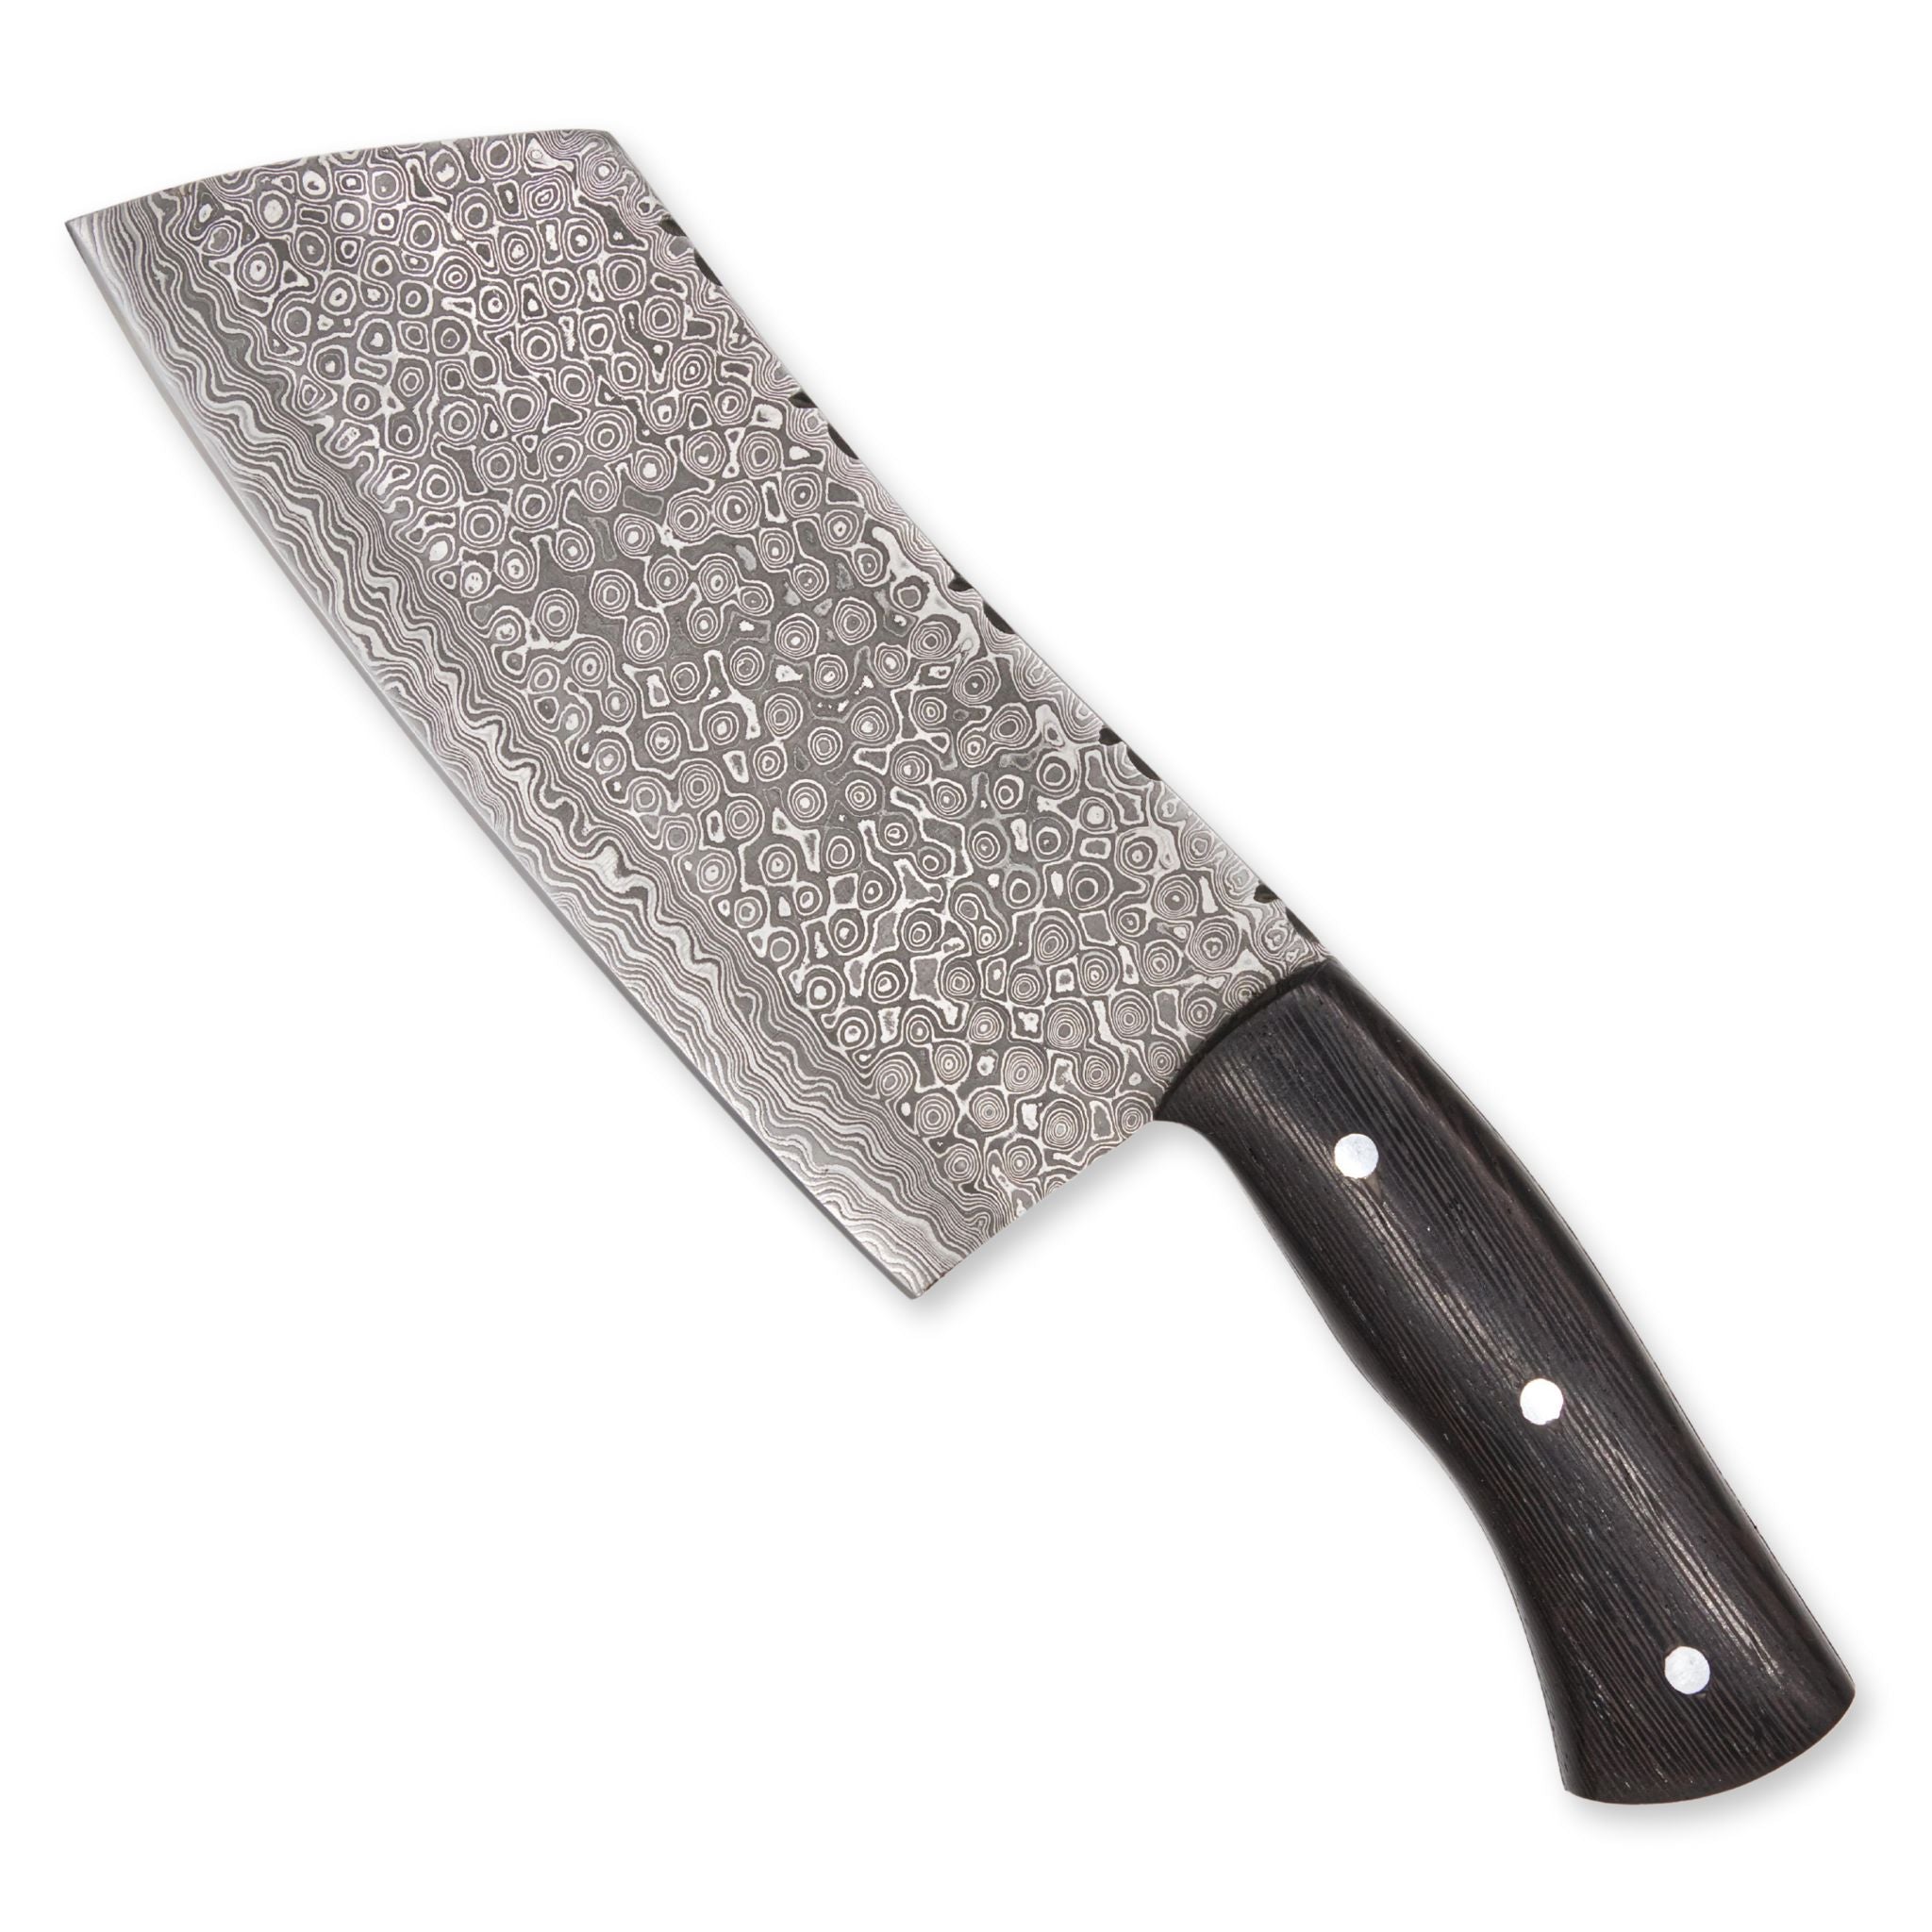 Max Mettle I, Handmade Meat Cleaver